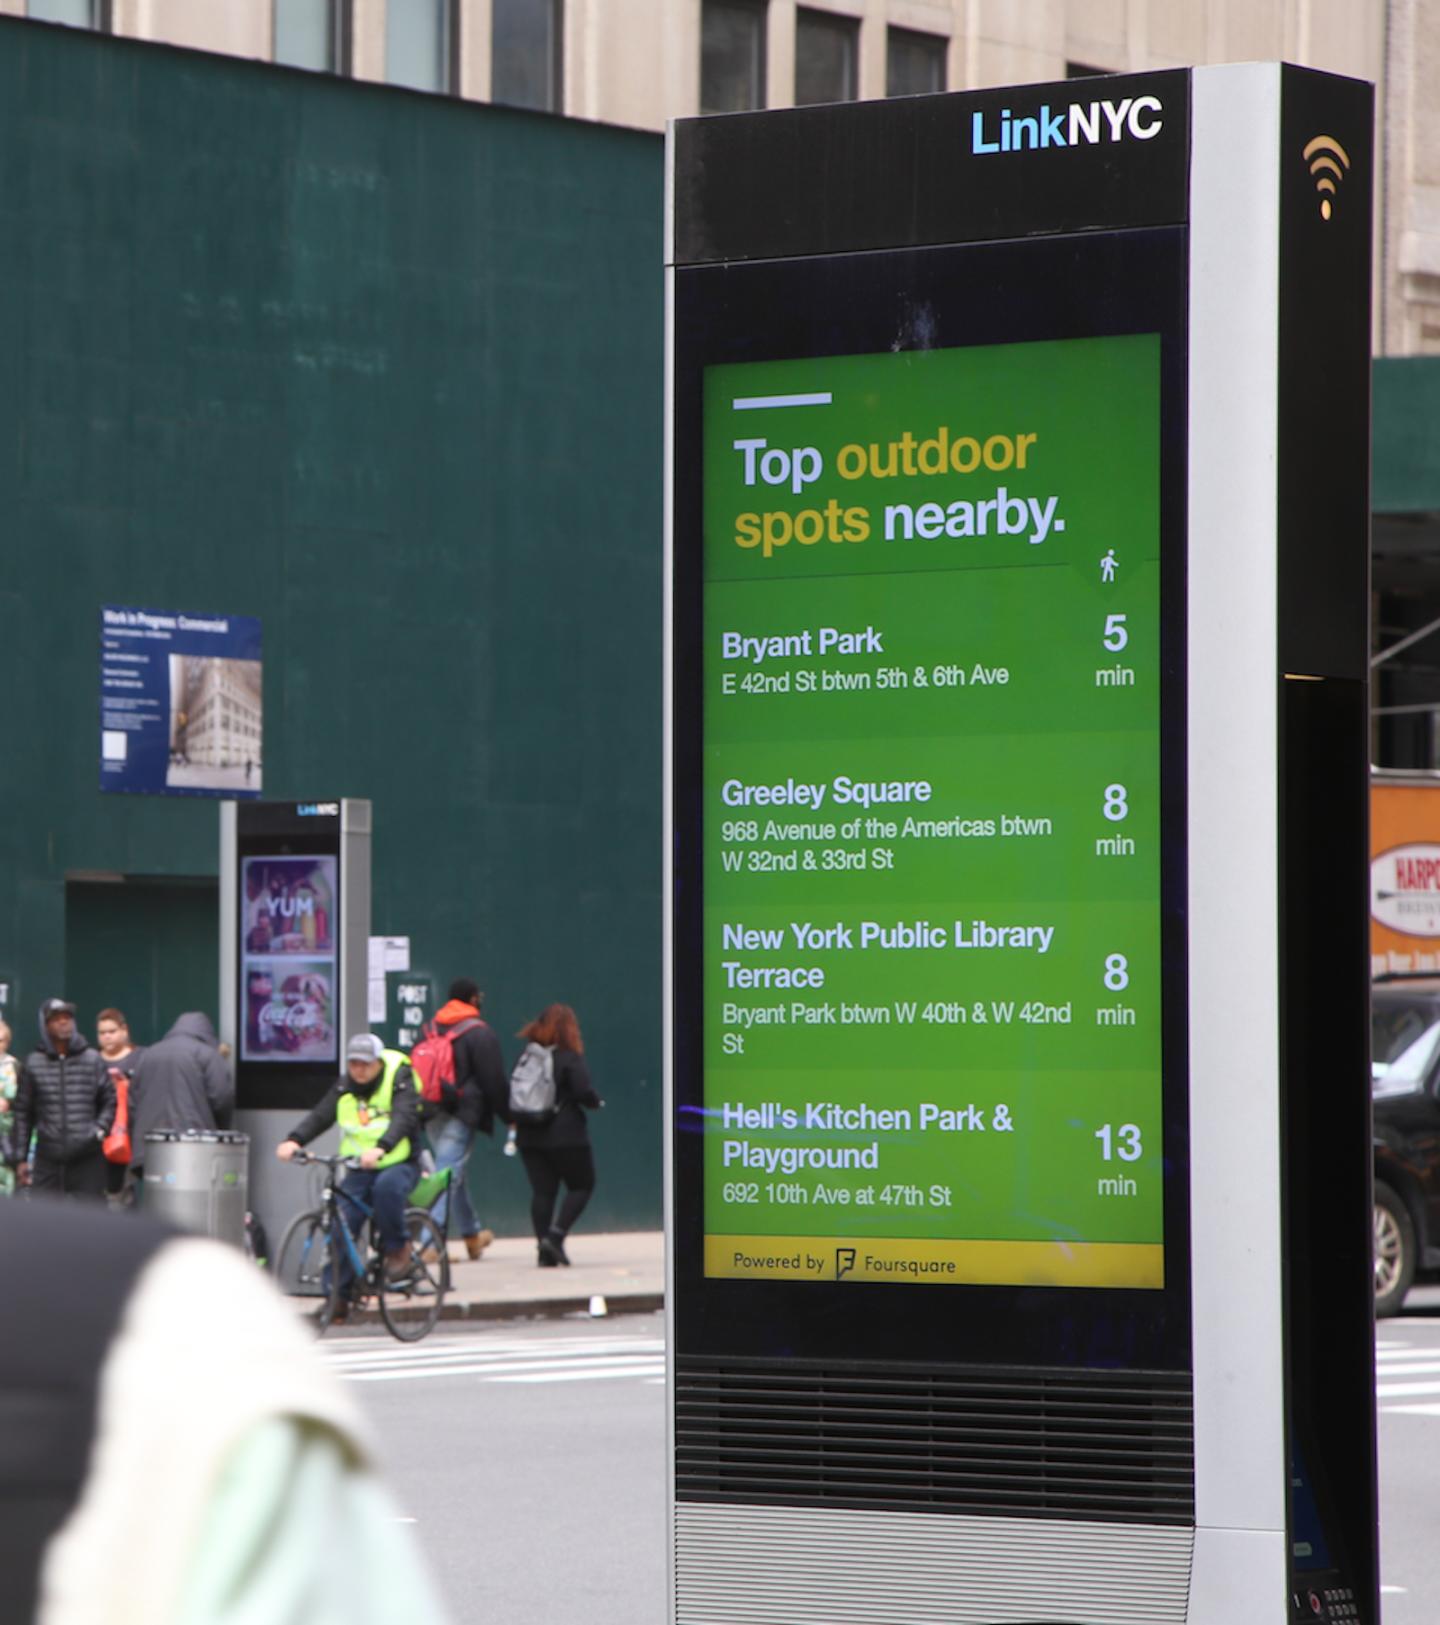 An Image of a digital board in NYC called "Link NYC". It is displaying a list of "Top Outdoor spots nearby" which include Bryant Park, Greeley Square, New York Public Library Terrace, and Hell's Kitchen Park and Playground with the prospective distance in minutes.